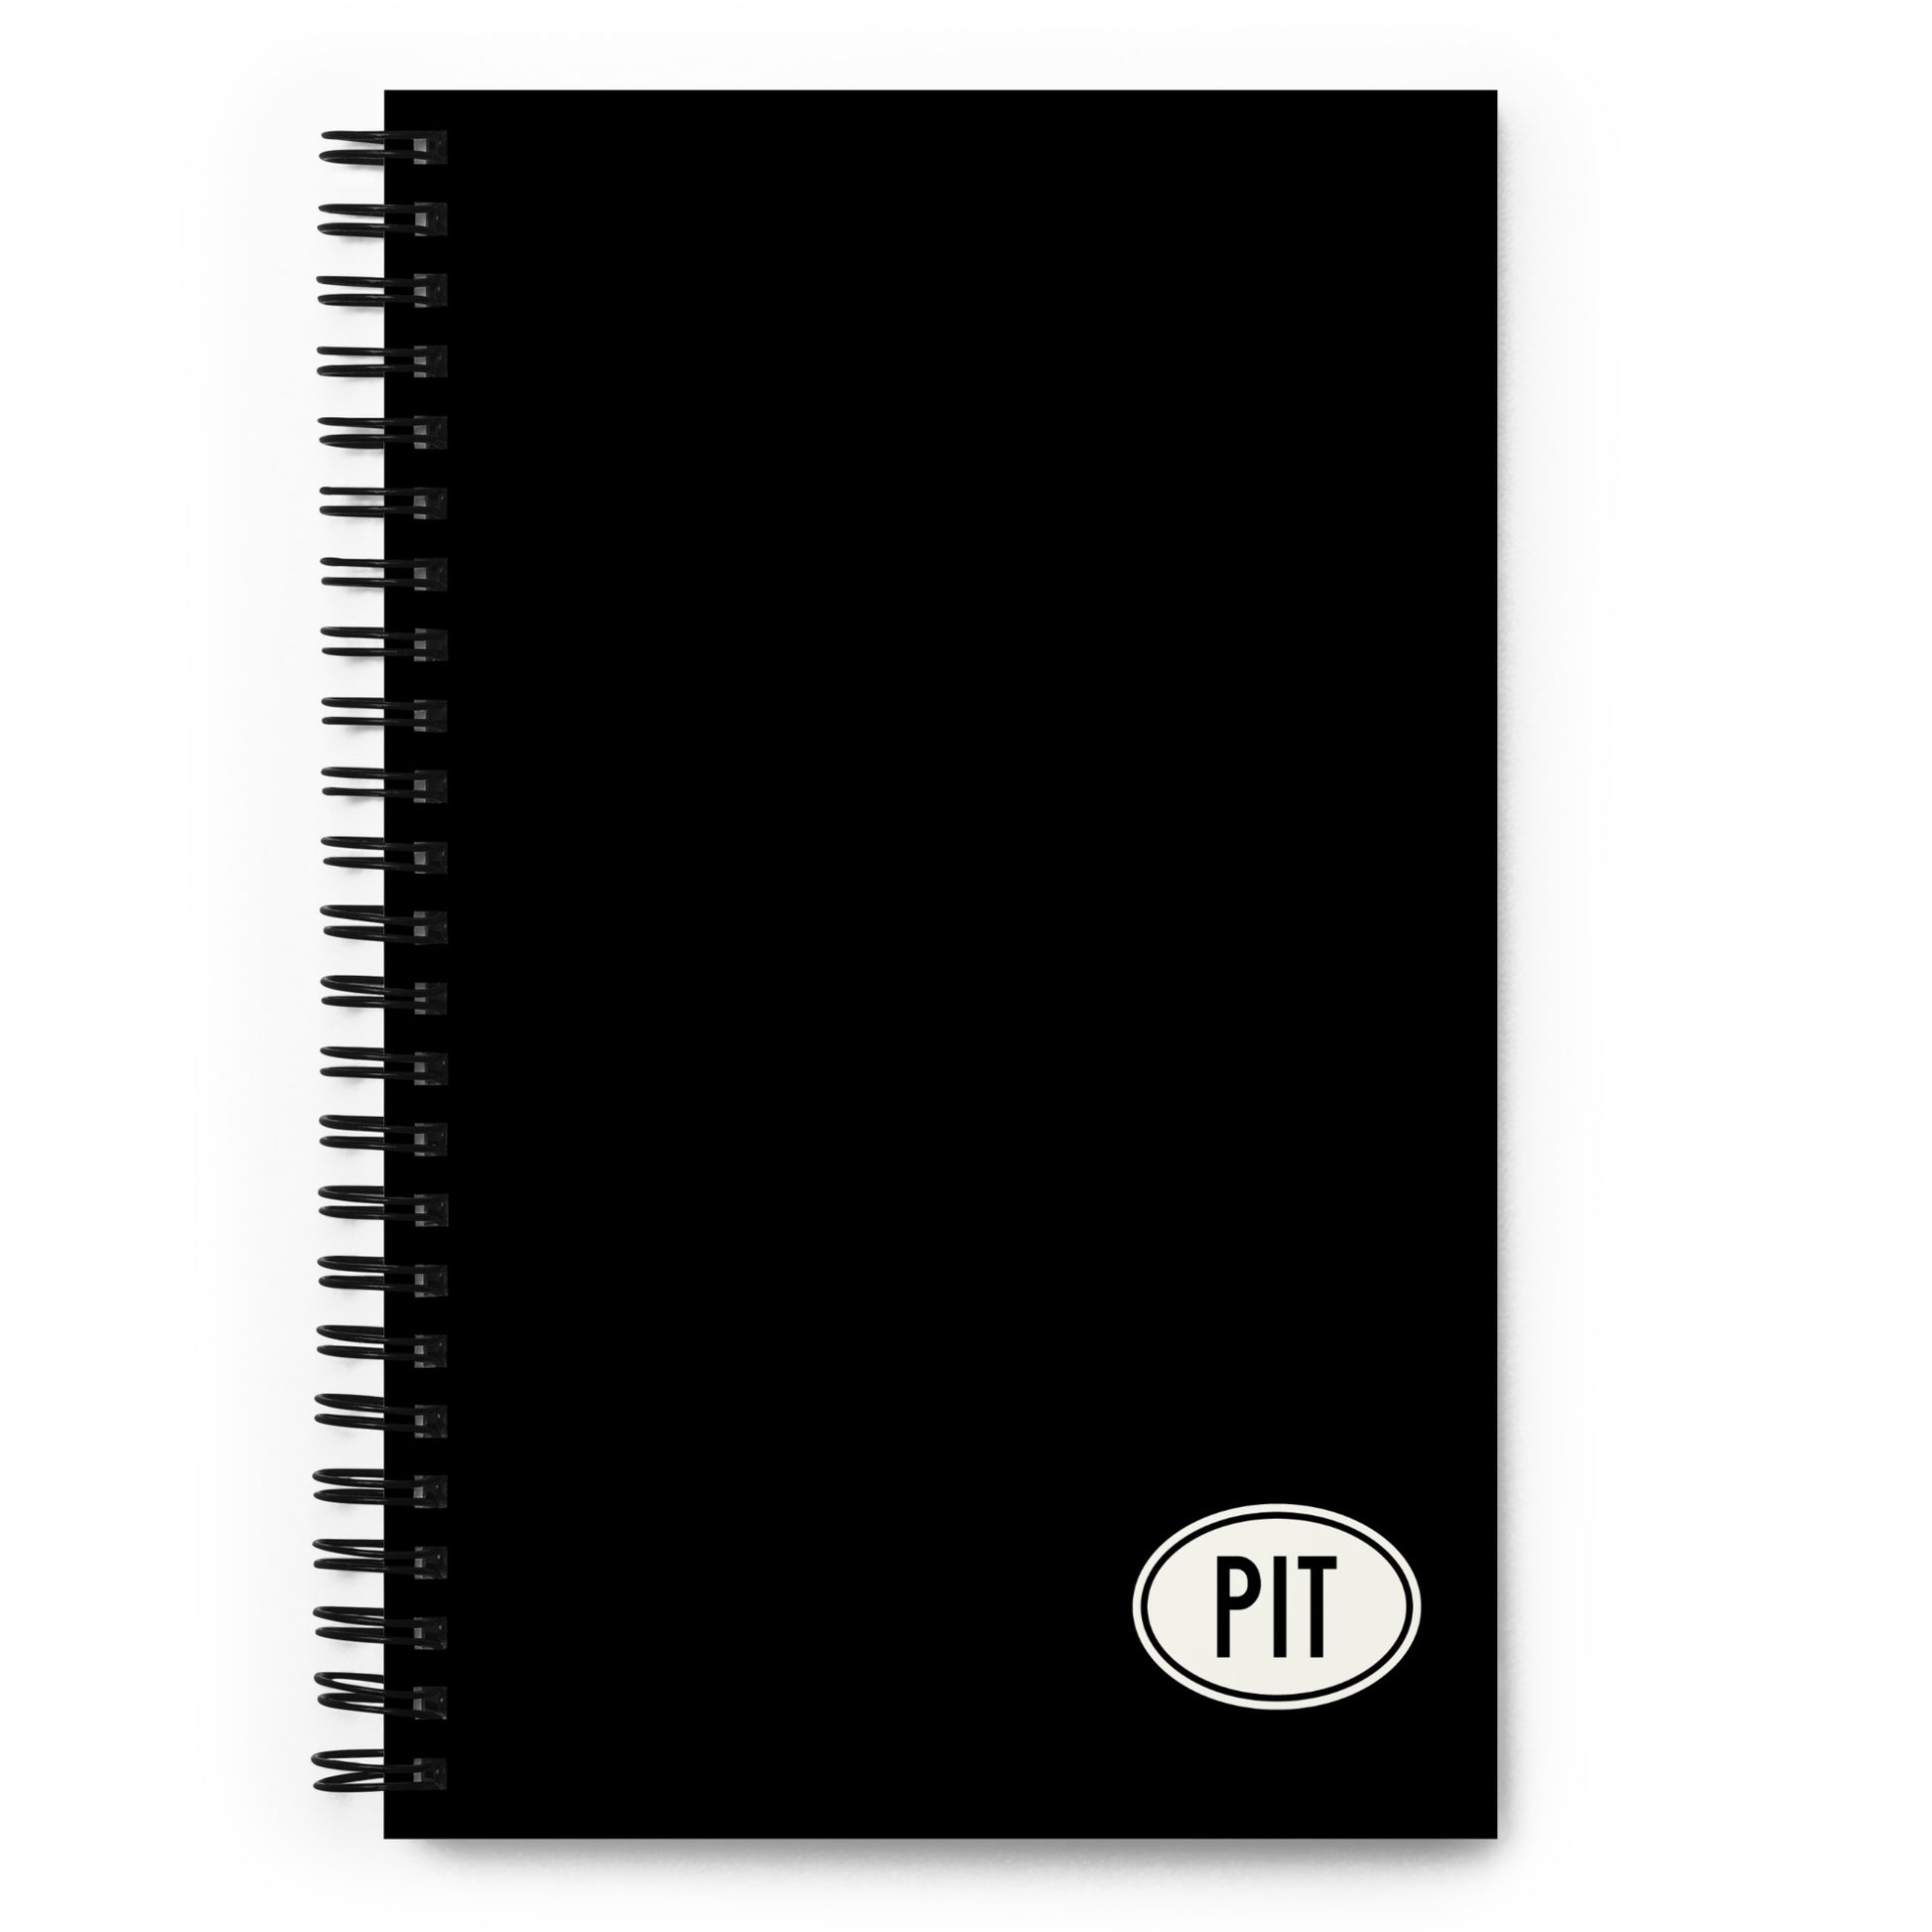 Unique Travel Gift Spiral Notebook - White Oval • PIT Pittsburgh • YHM Designs - Image 01